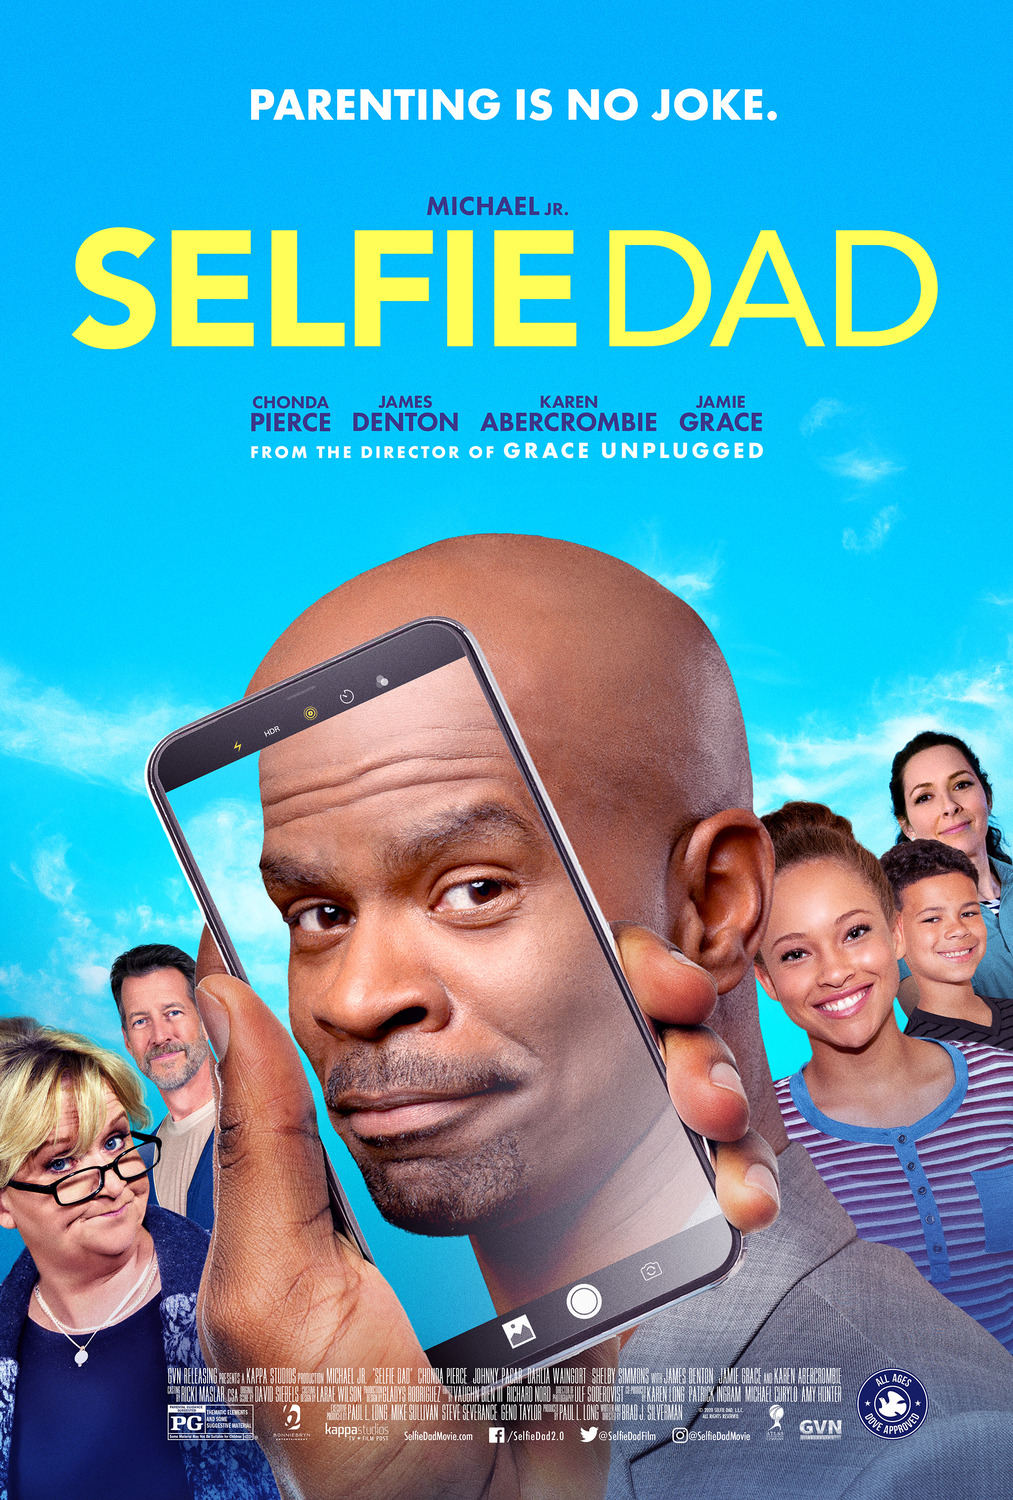 Extra Large Movie Poster Image for Selfie Dad 